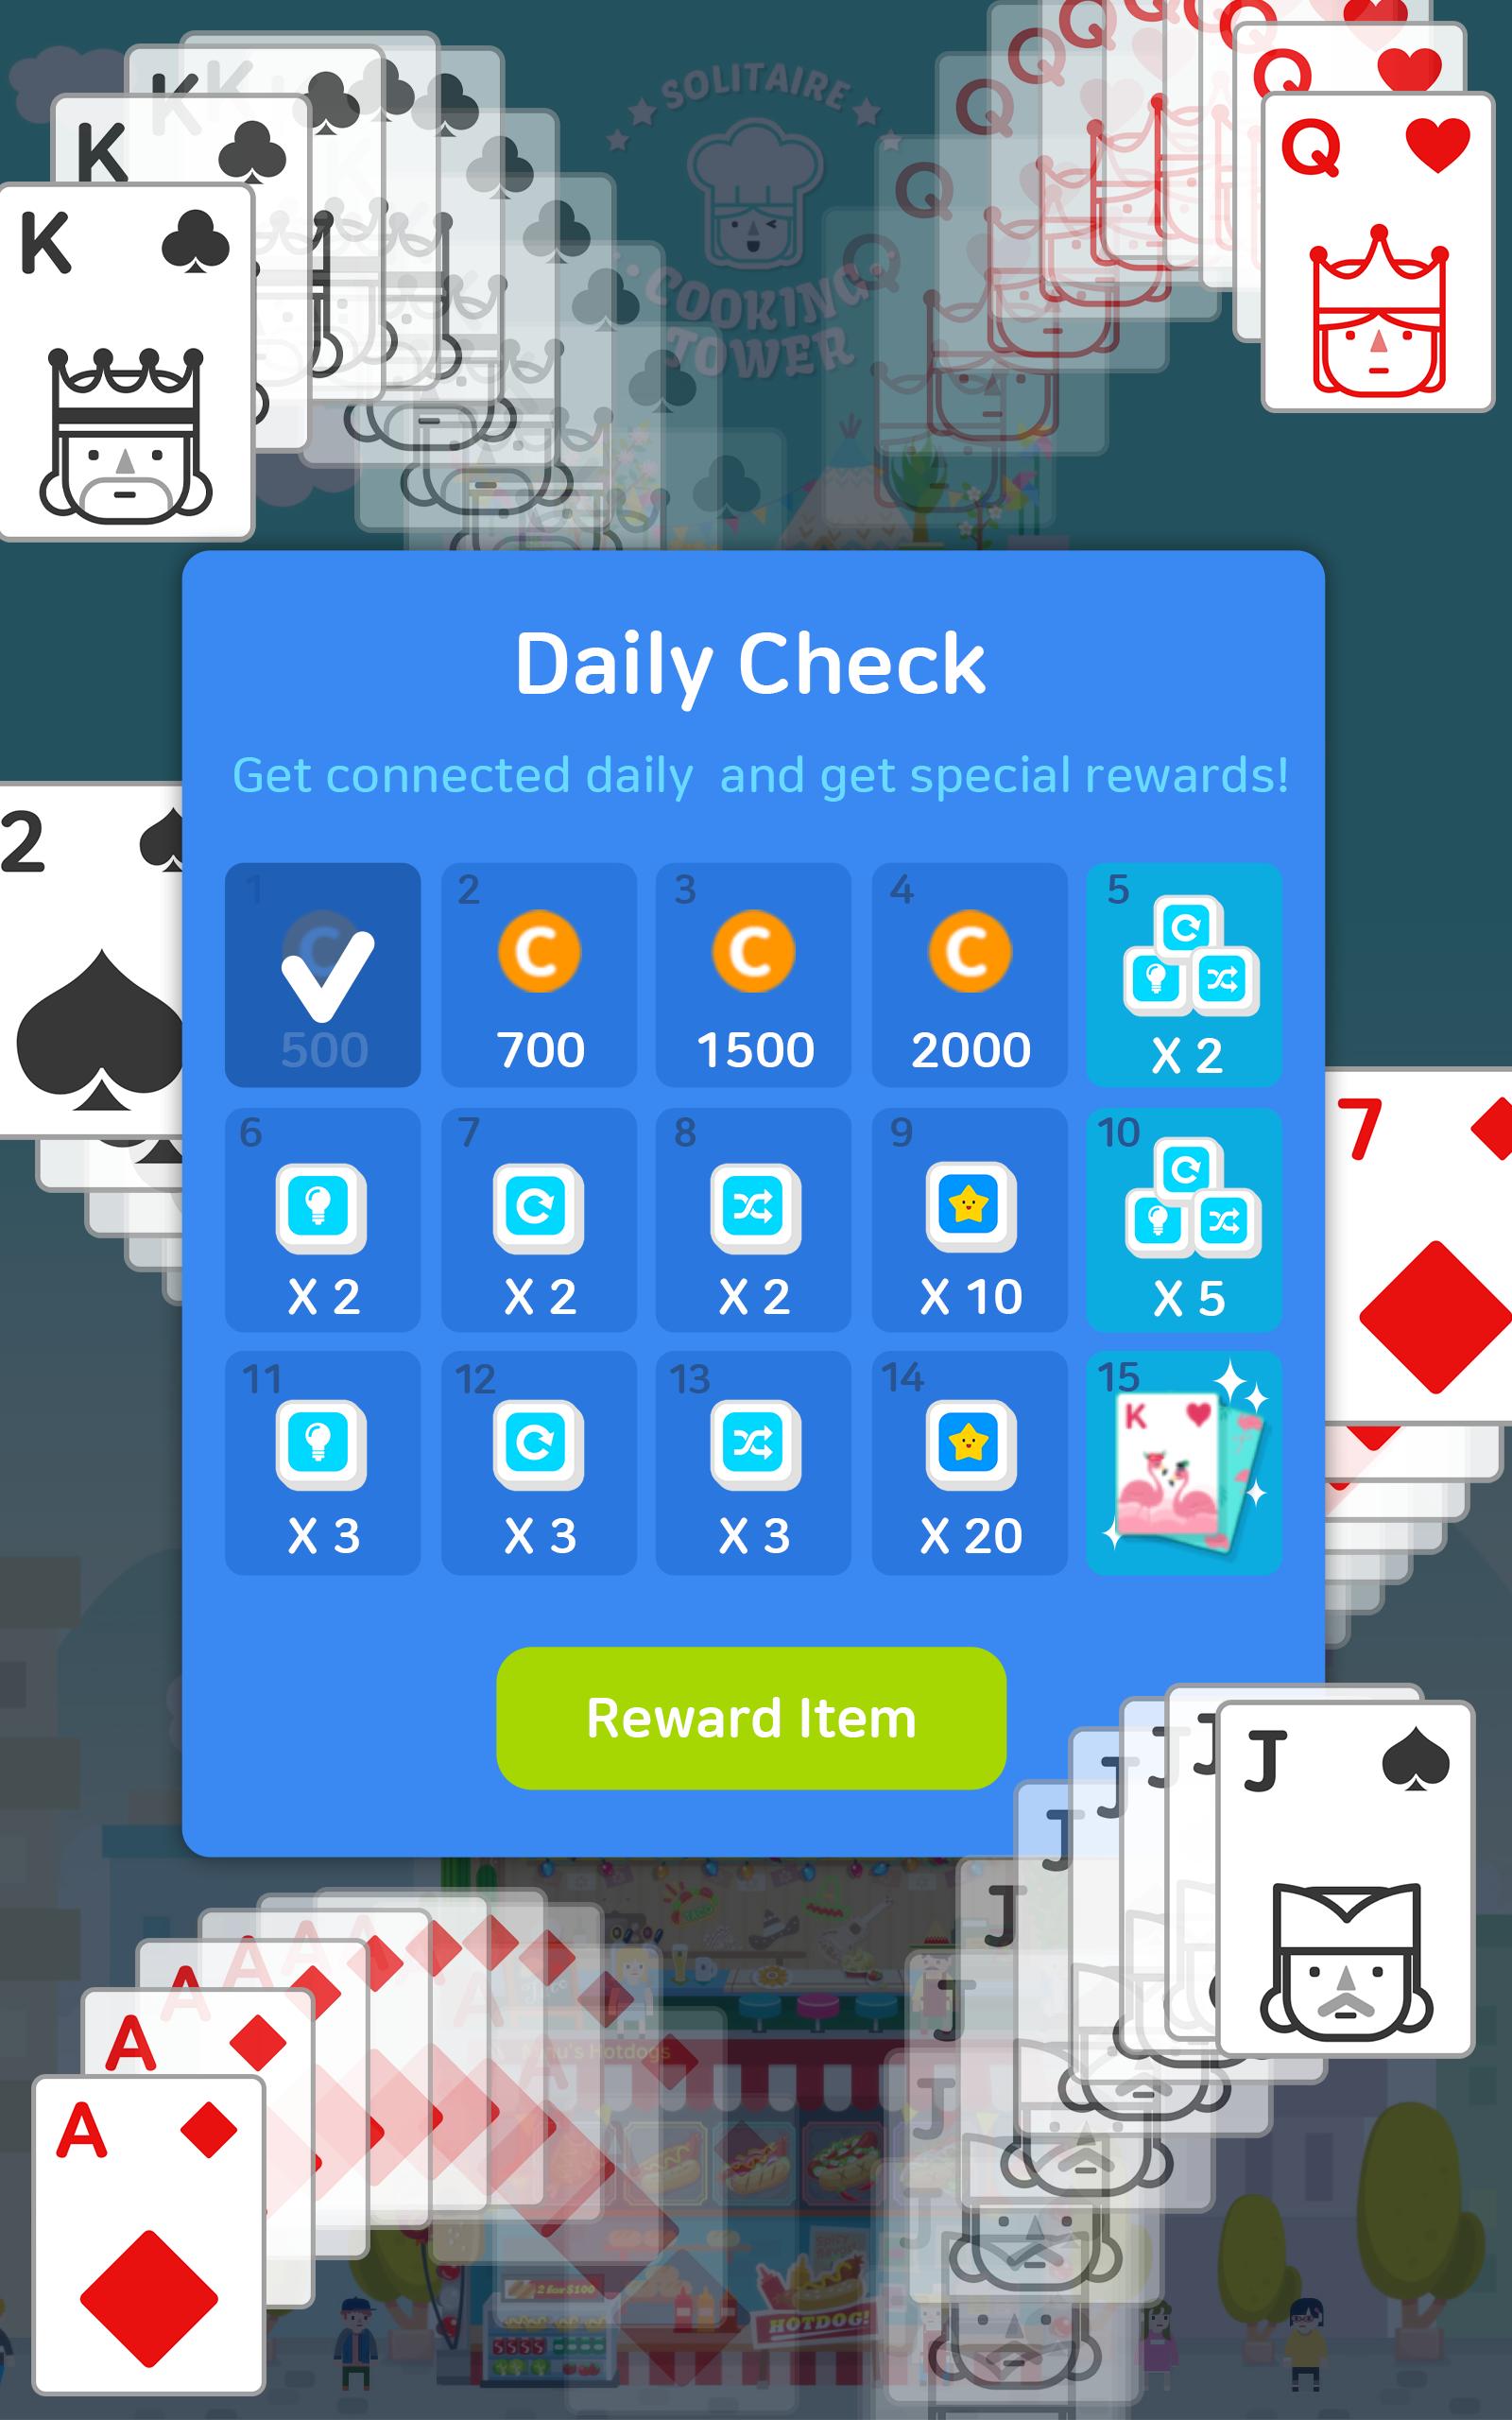 Solitaire : Cooking Tower 1.3.8 Screenshot 12